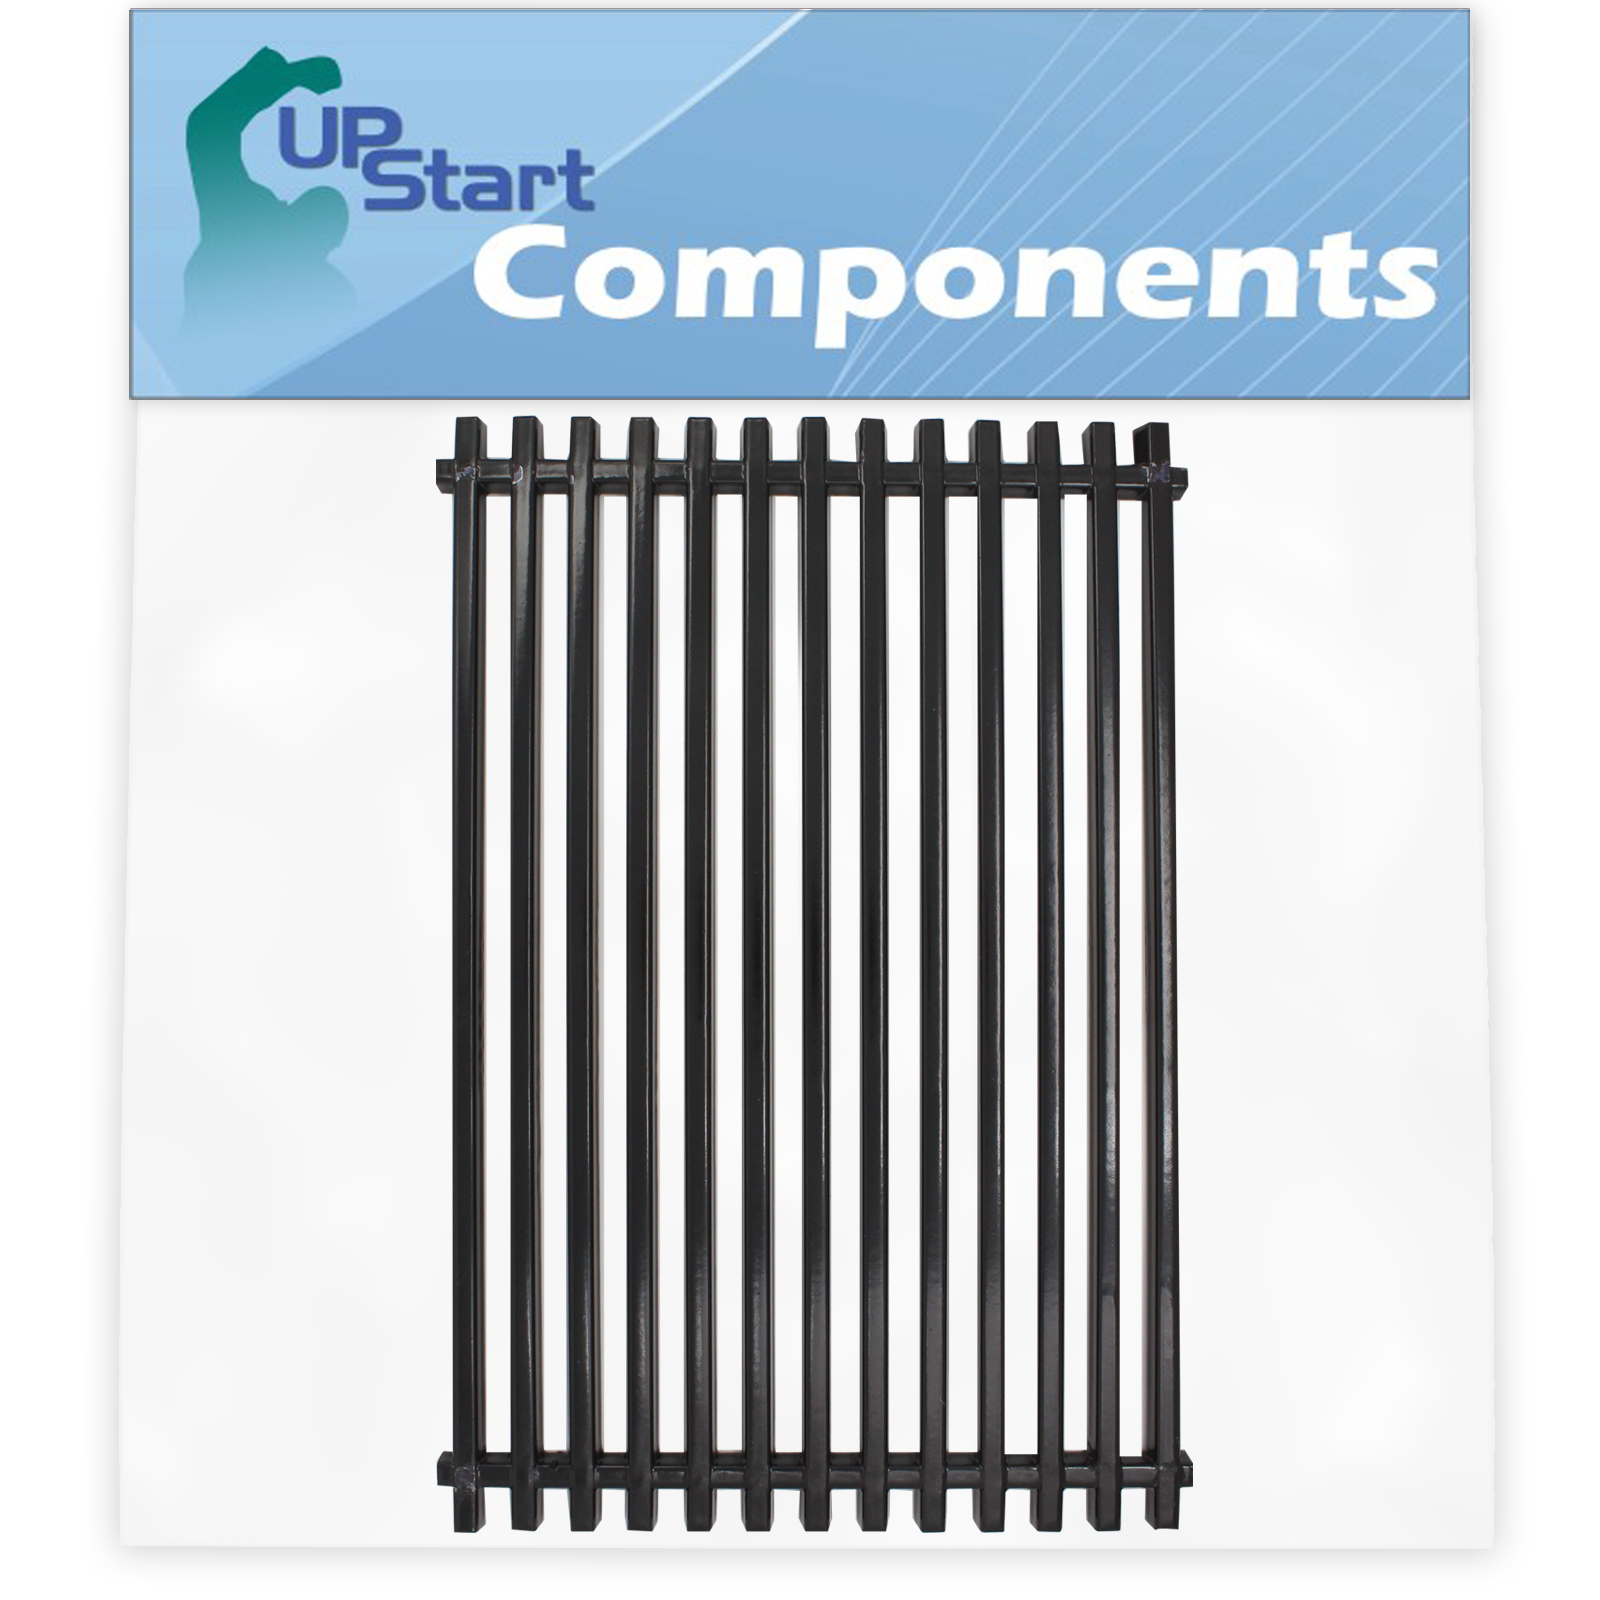 BBQ Grill Cooking Grates Replacement Parts for Kalamazoo Pedestal - Compatible Barbeque Porcelain Coated Steel Grid 17 3/4" - image 1 of 4